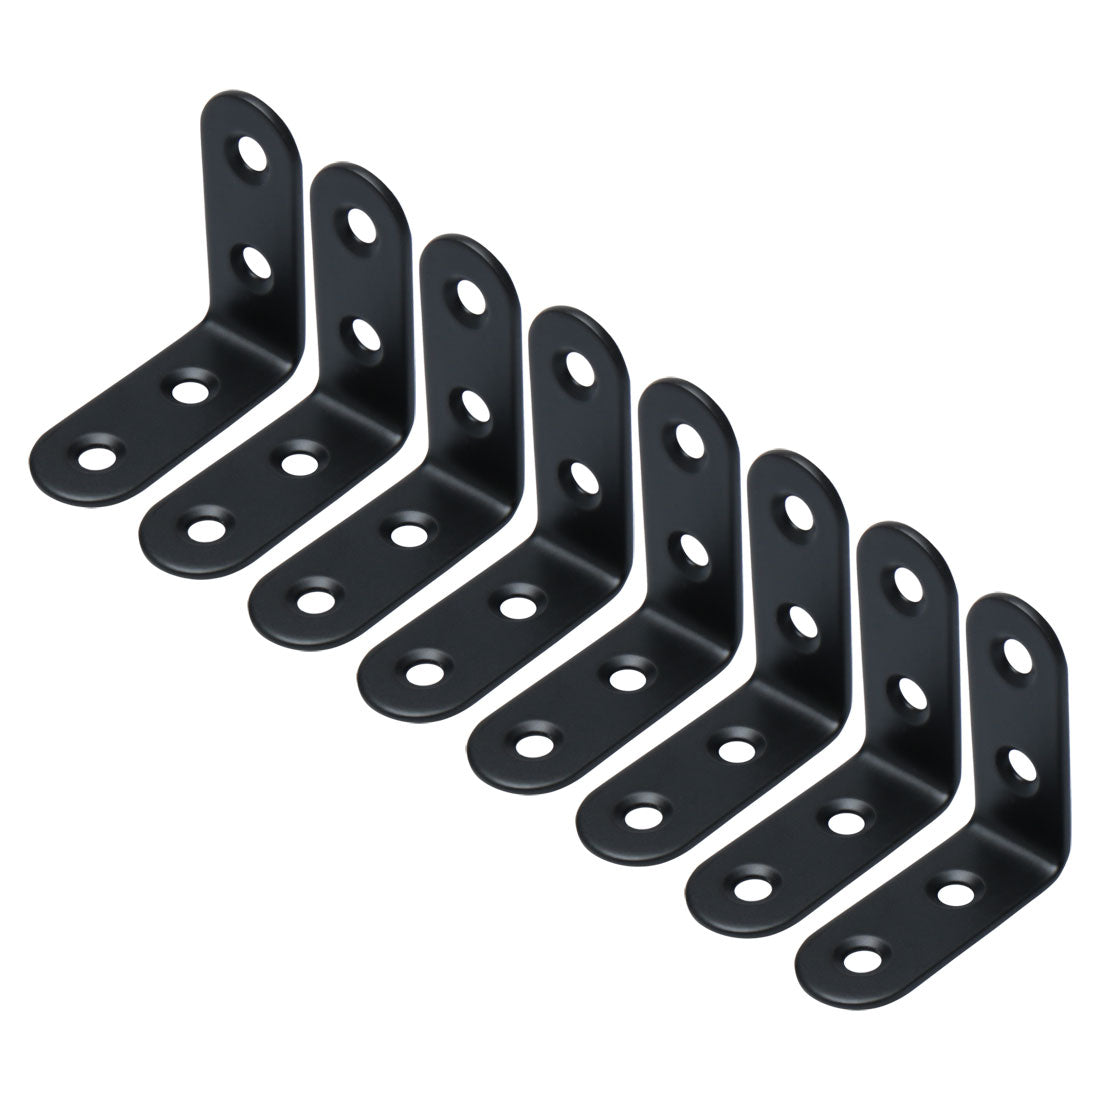 uxcell Uxcell Angle Bracket Stainless Steel Floating Shelf Fastener Support 50 x 50mm, 8pcs